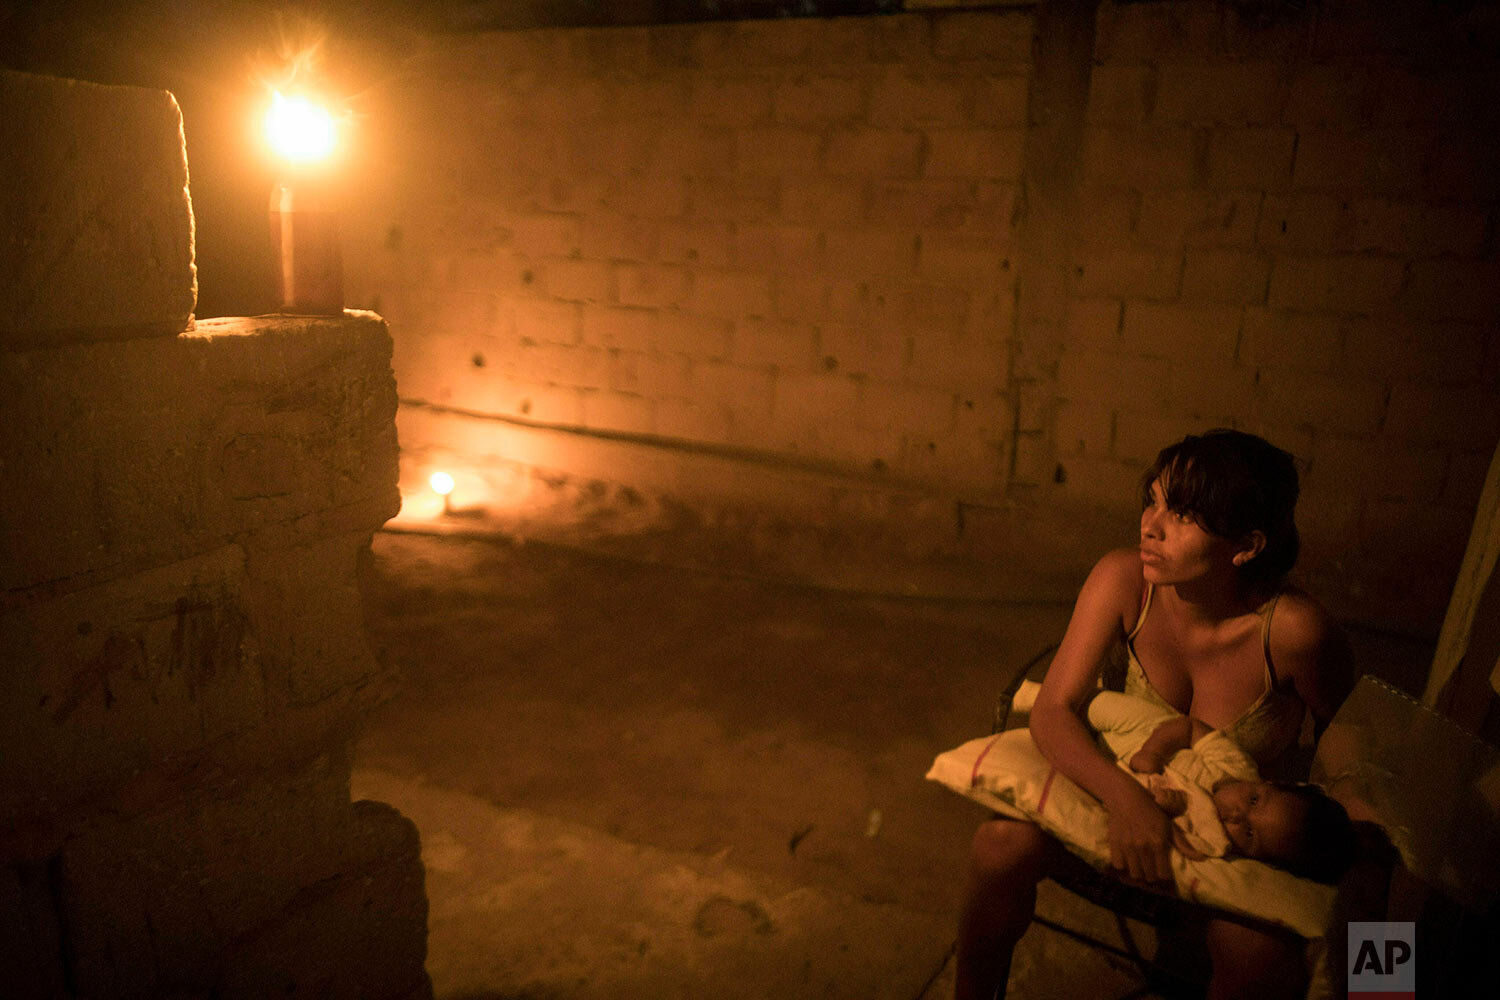  In this May 15, 2019 photo, Jennifer Vejar holds her 2-month-old baby Enmanuel Benitez, illuminated by a torch known in Maracaibo as a "Mechurrio," in reference to the flares that burn excess gases on oil wells, during a black out in Maracaibo, Vene